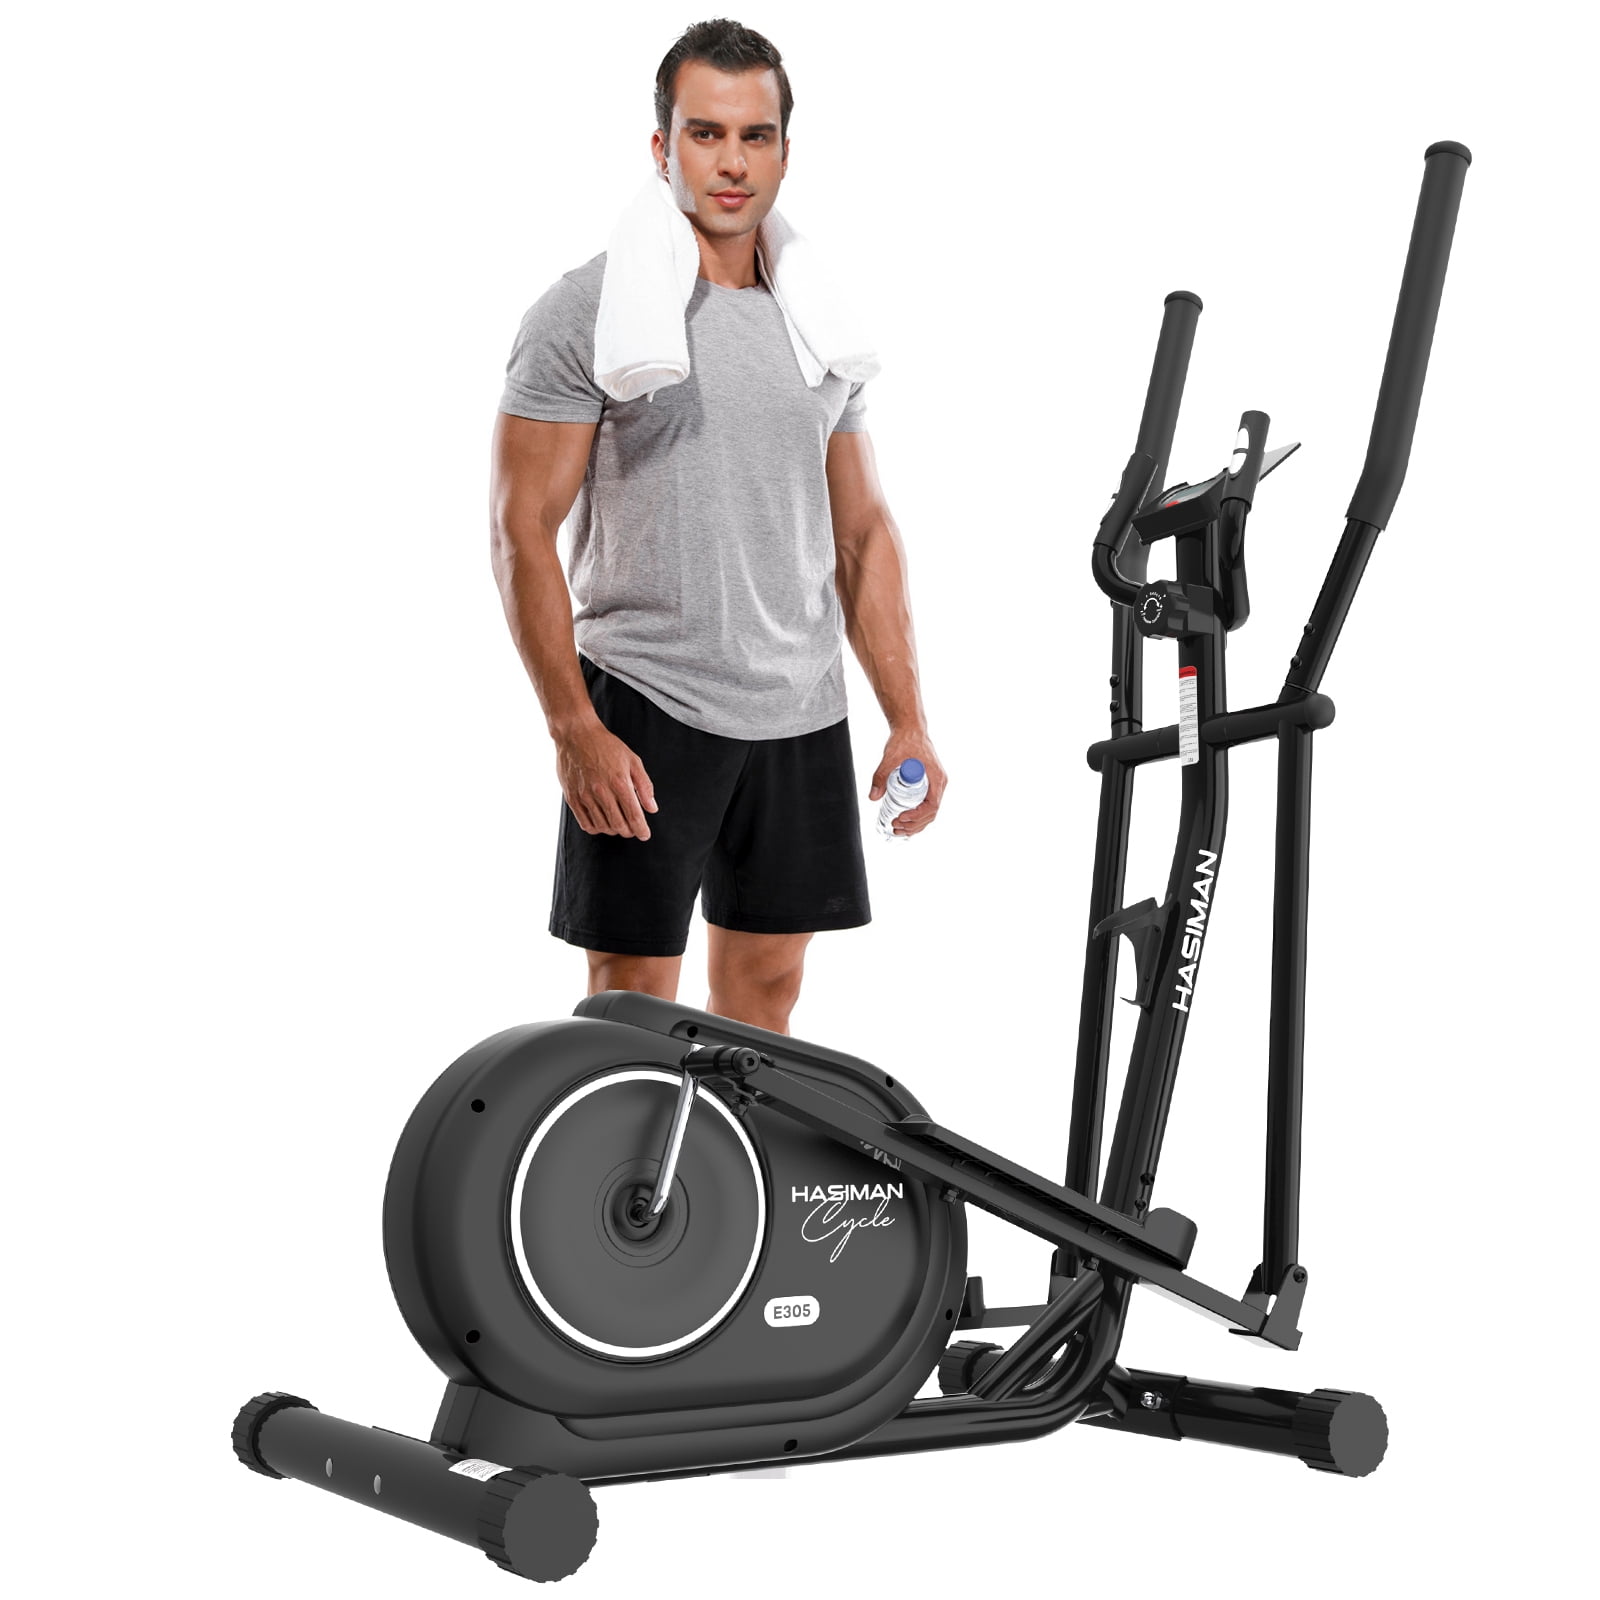 Exercise Workout Magnetic Elliptical Machine Trainer Fitness Exercise Equipment 